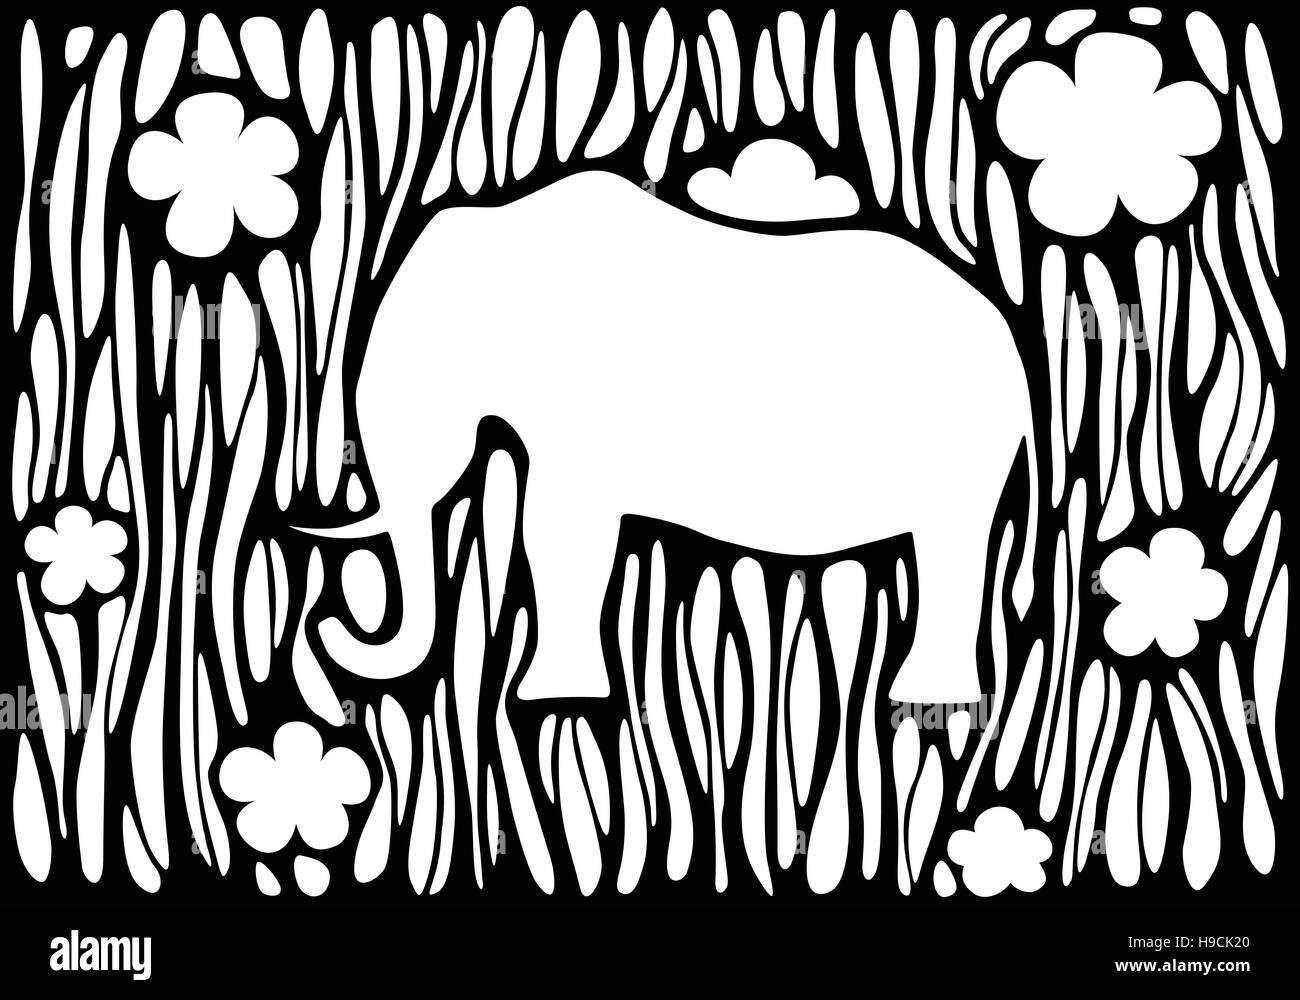 Graphic silhouette of an elephant on an abstract background Stock Vector